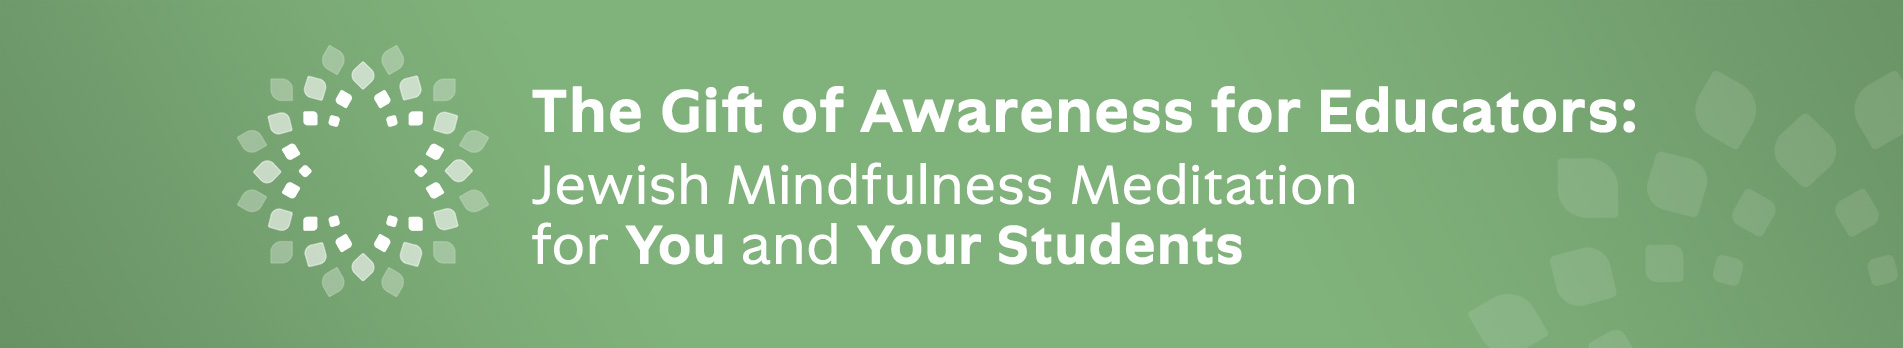 The GIft of Awareness for Educators: Jewish Mindfulness Meditation for You and Your Students